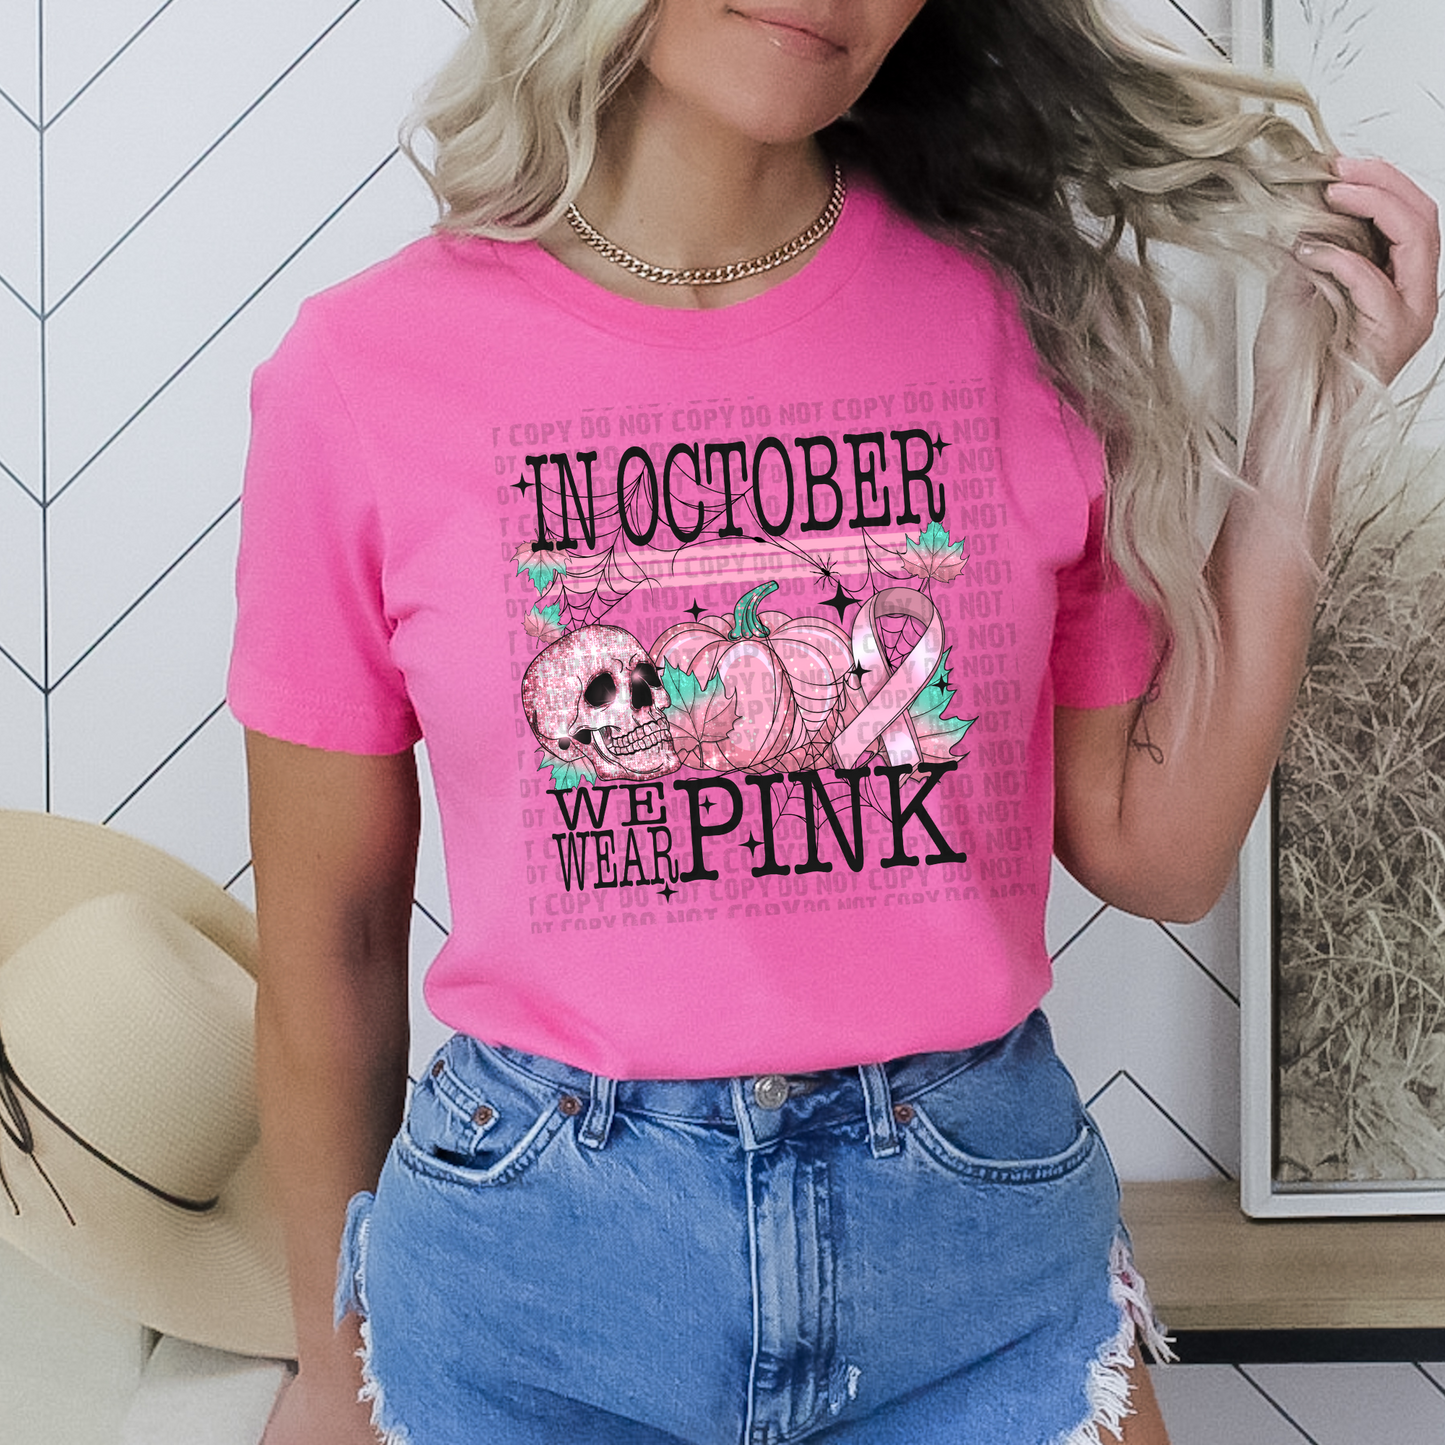 In October We Wear Pink T-Shirt | Breast Cancer Awareness Shirt | Fast Shipping | Super Soft Shirts for Women/Kid's